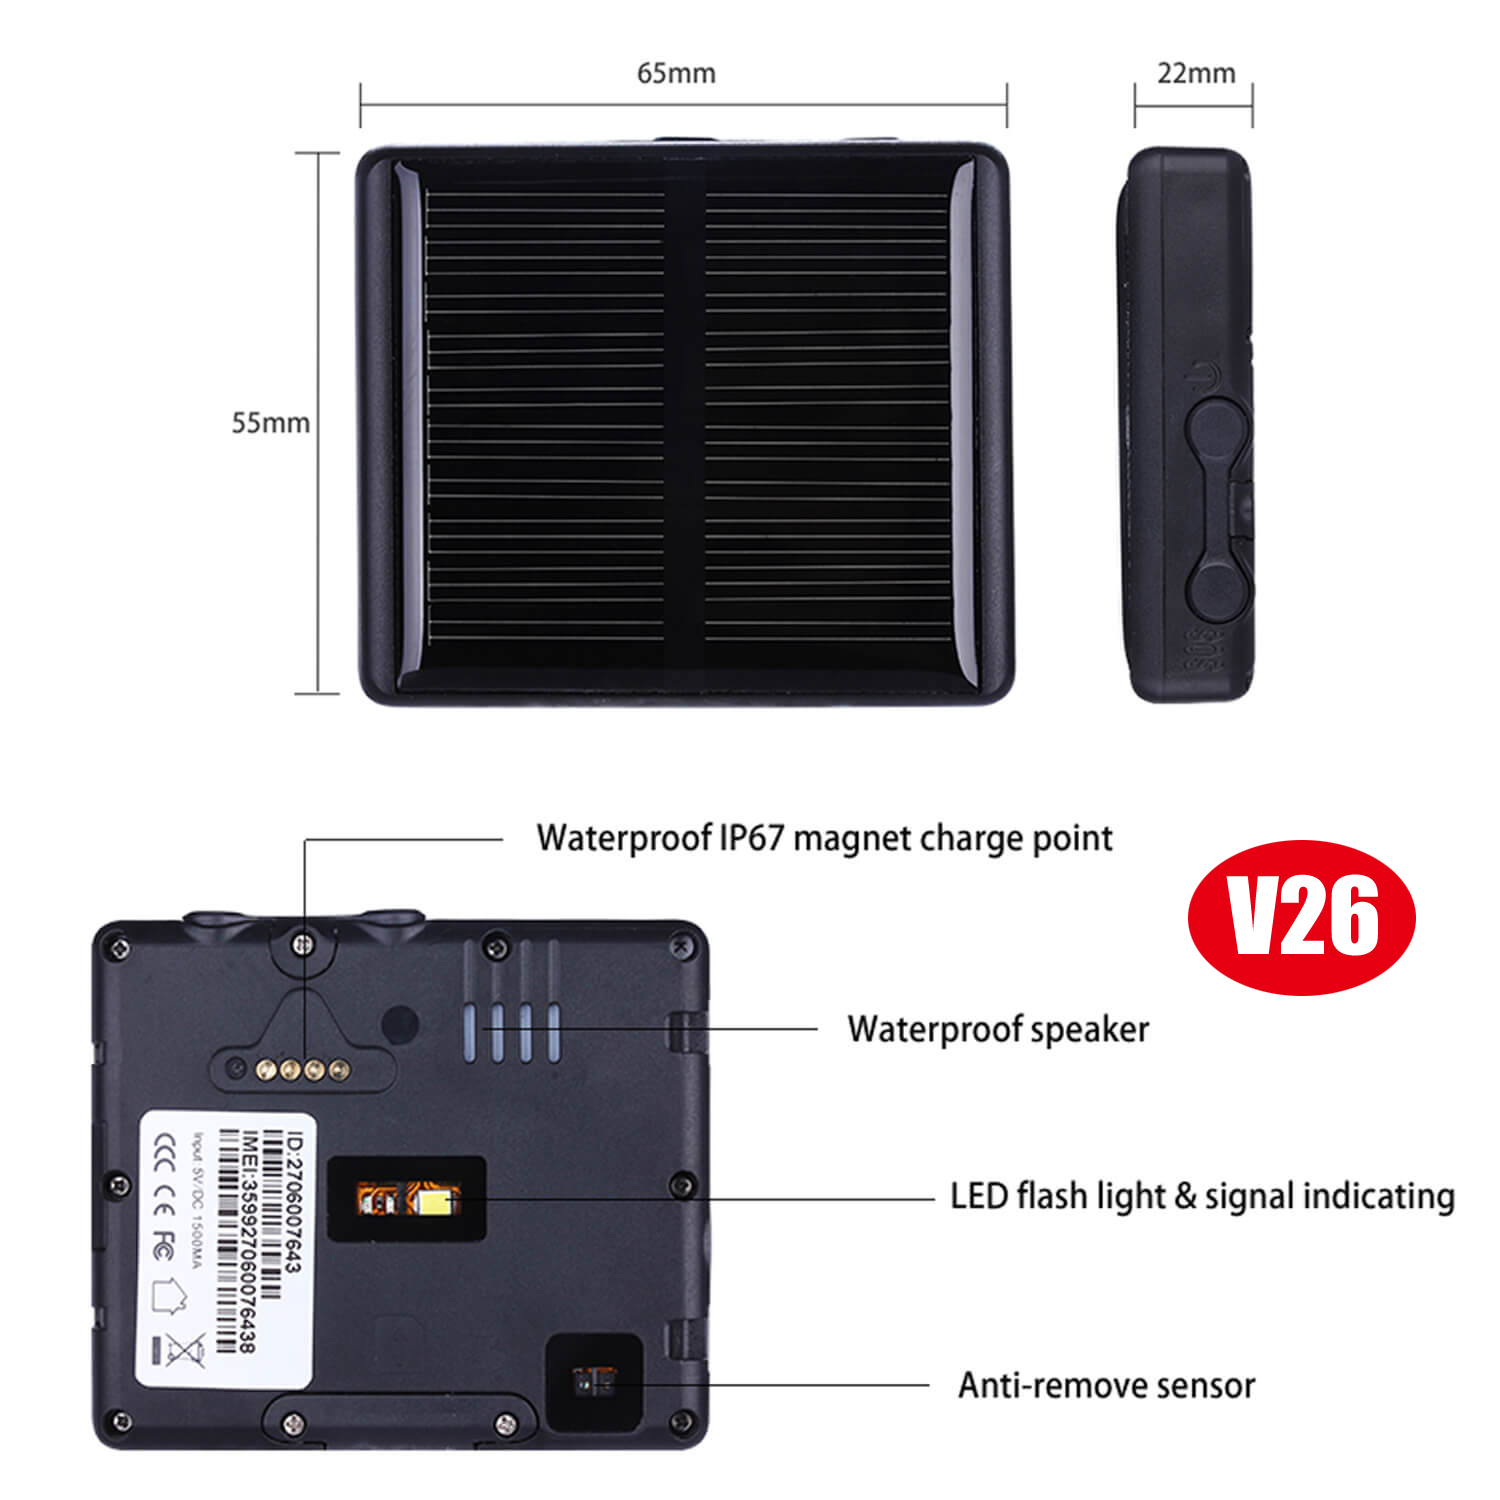 High Quality GSM Solar-Powered GPS Tracker for Pet Cow